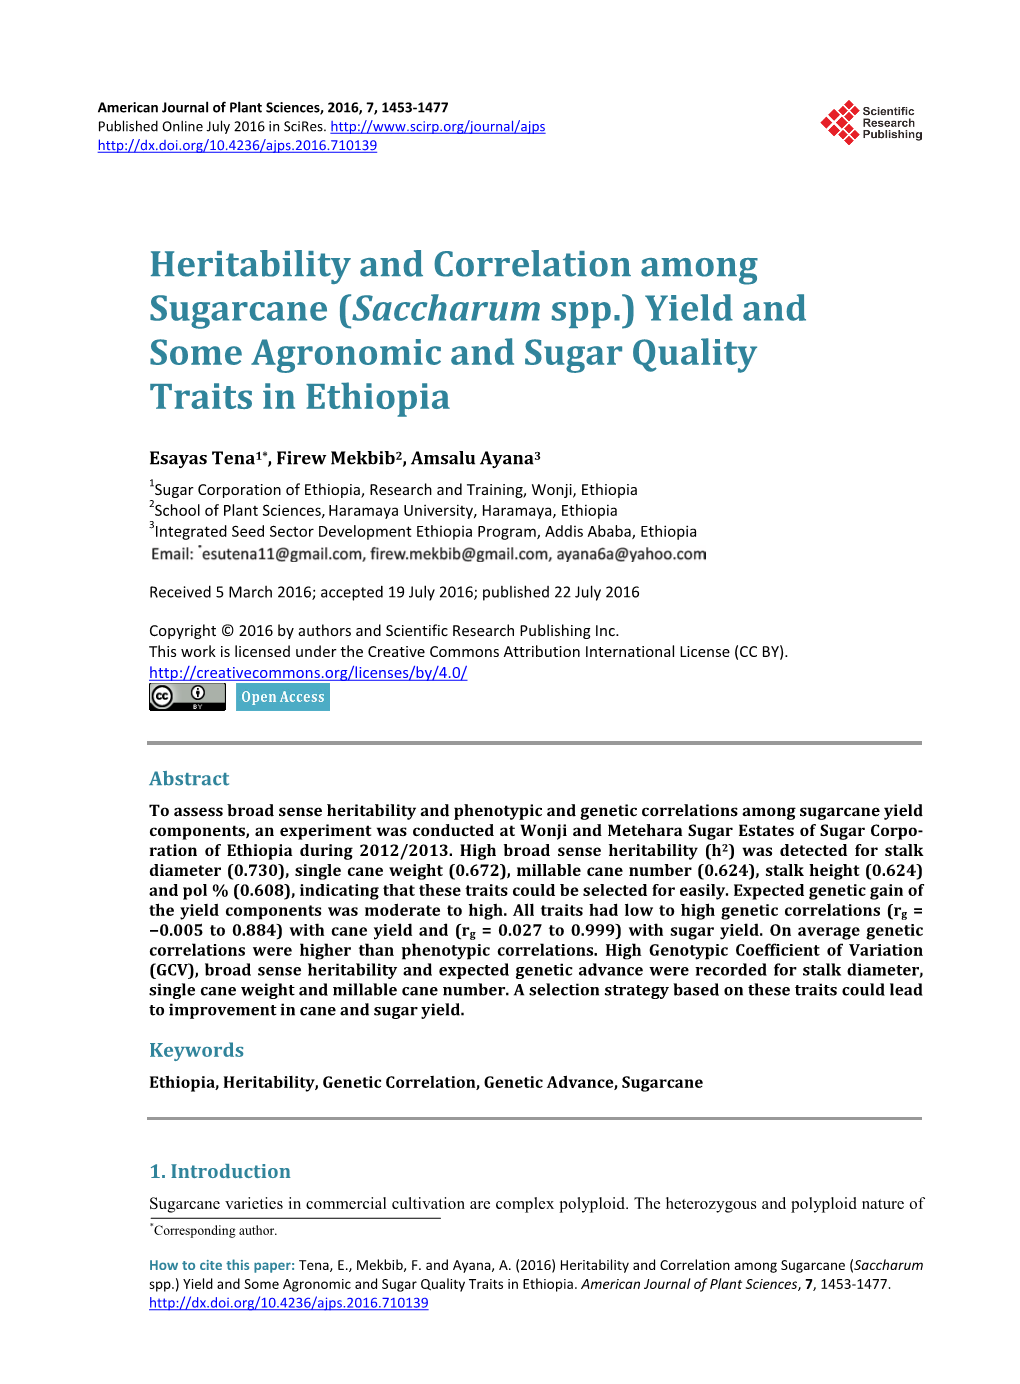 Heritability and Correlation Among Sugarcane (Saccharum Spp.) Yield and Some Agronomic and Sugar Quality Traits in Ethiopia